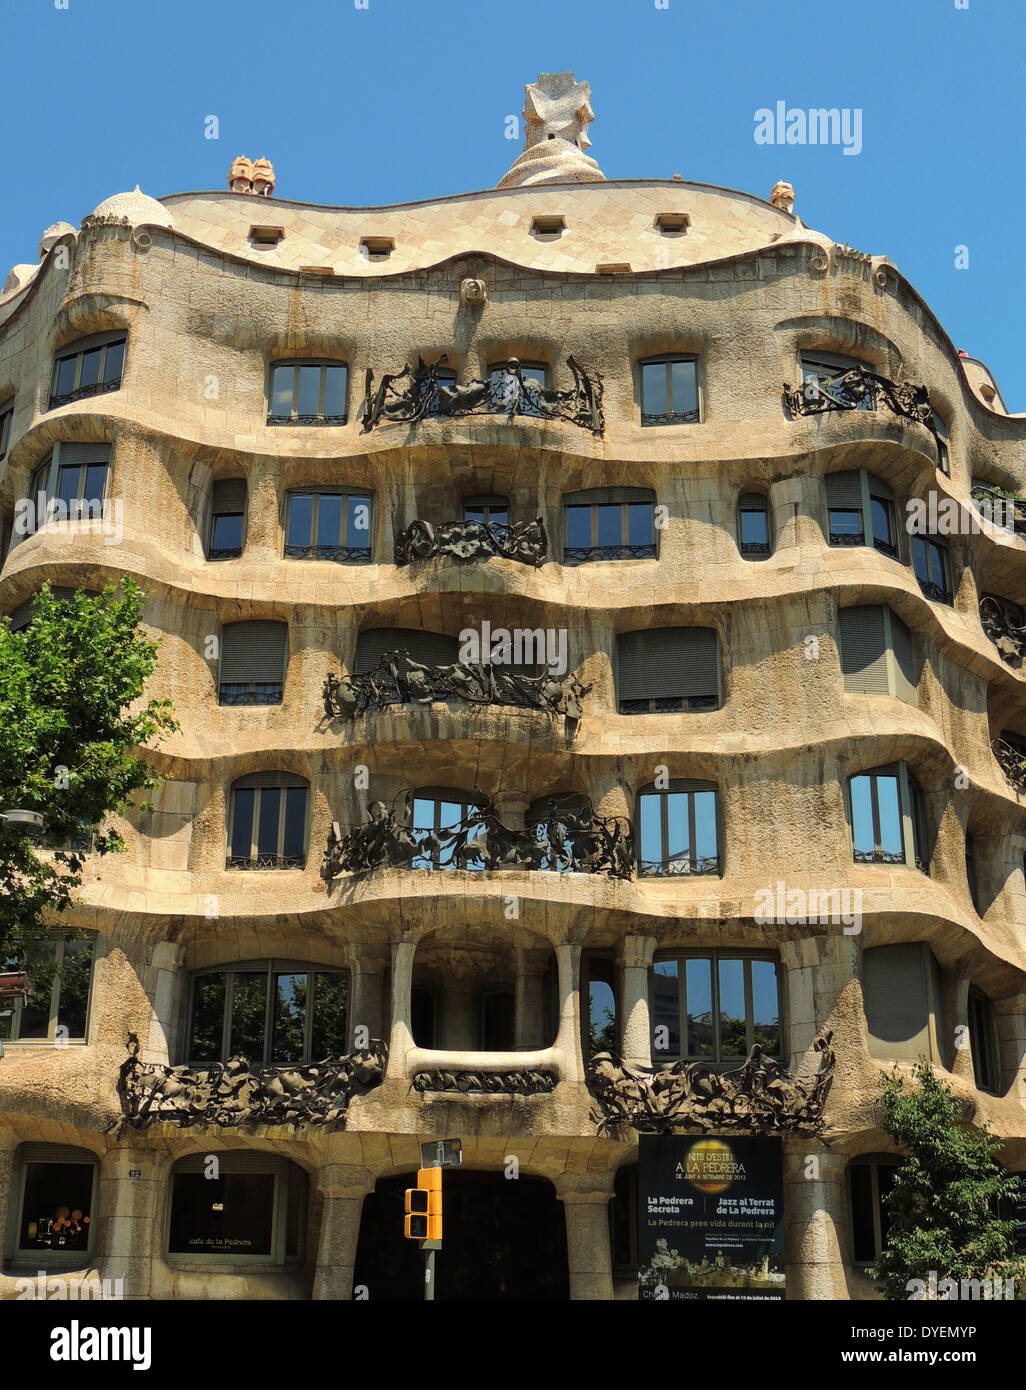 the facade of Casa Milà known as La Pedrera (meaning the 'The Quarry')is a building designed by the Catalan architect Antoni Gaudi and built during the years 1906–1912. It is located at 92, Passeig de Gràcia (Passeig is Catalan for promenade) in the Example district of Barcelona, Catalonia, Spain. It was a controversial design at the time for the bold forms of the undulating stone facade and wrought iron decoration of the balconies and windows, designed largely by Josep Maria Jujol, who also created some of the plaster ceilings. Stock Photo